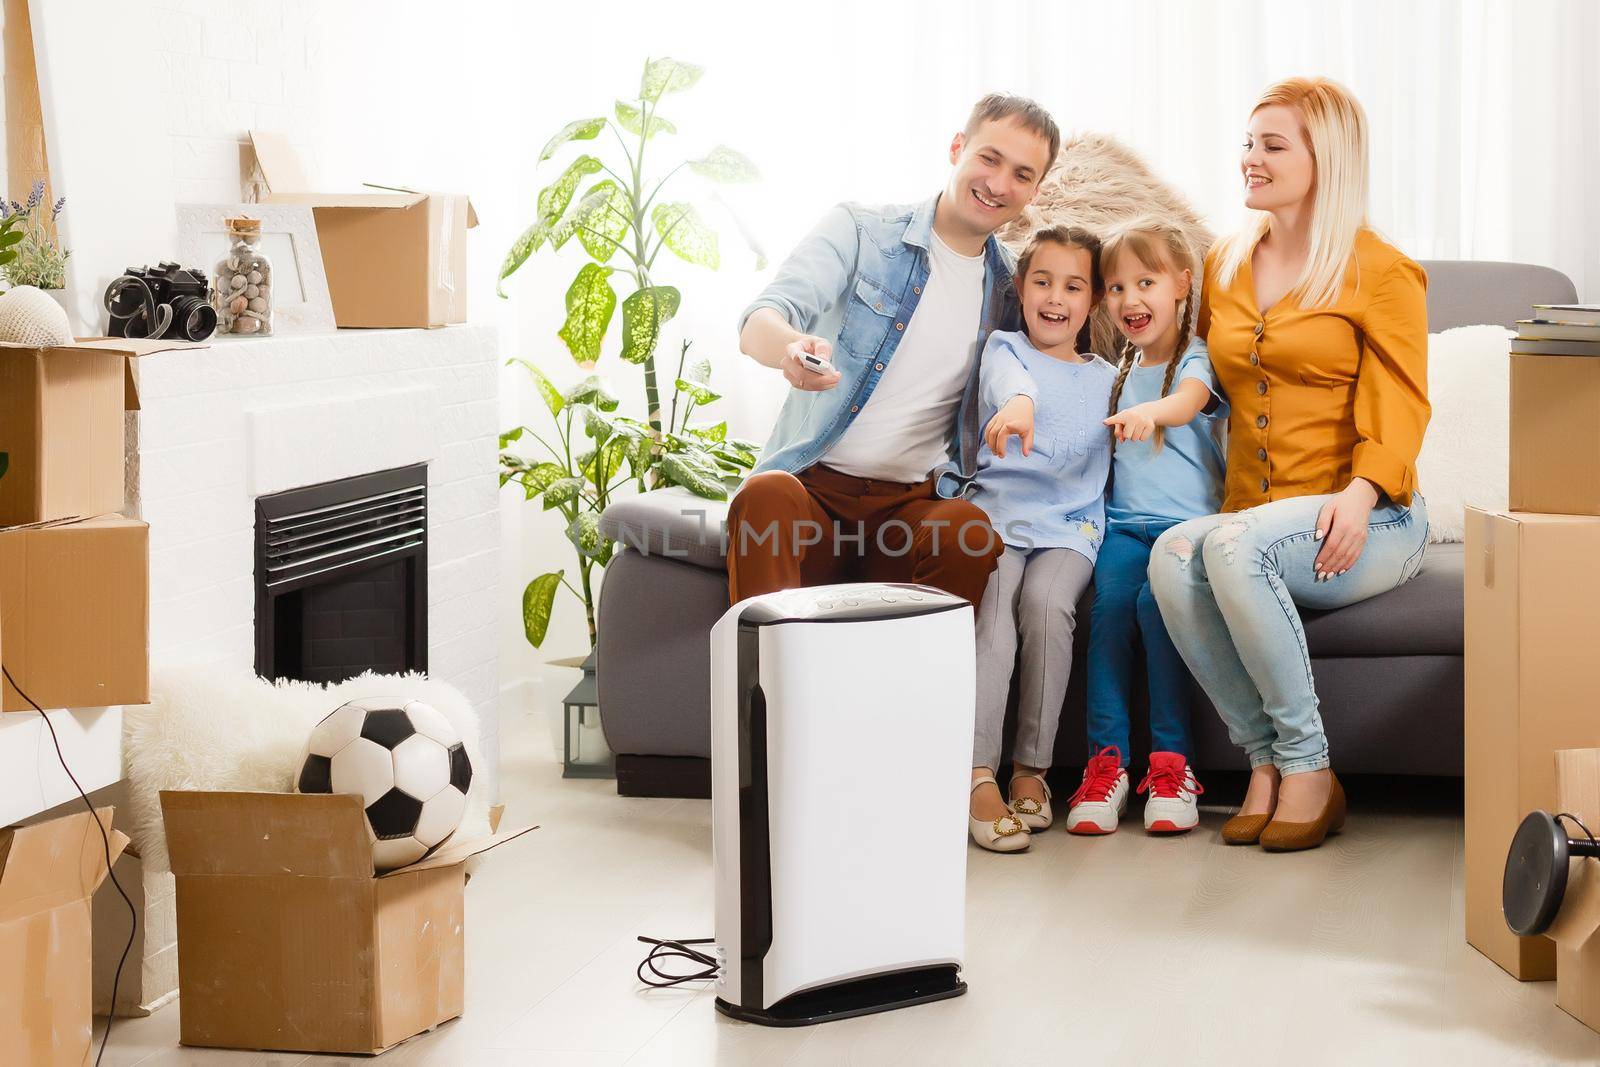 air purifier in living room with happy family moving to new apartment by Andelov13